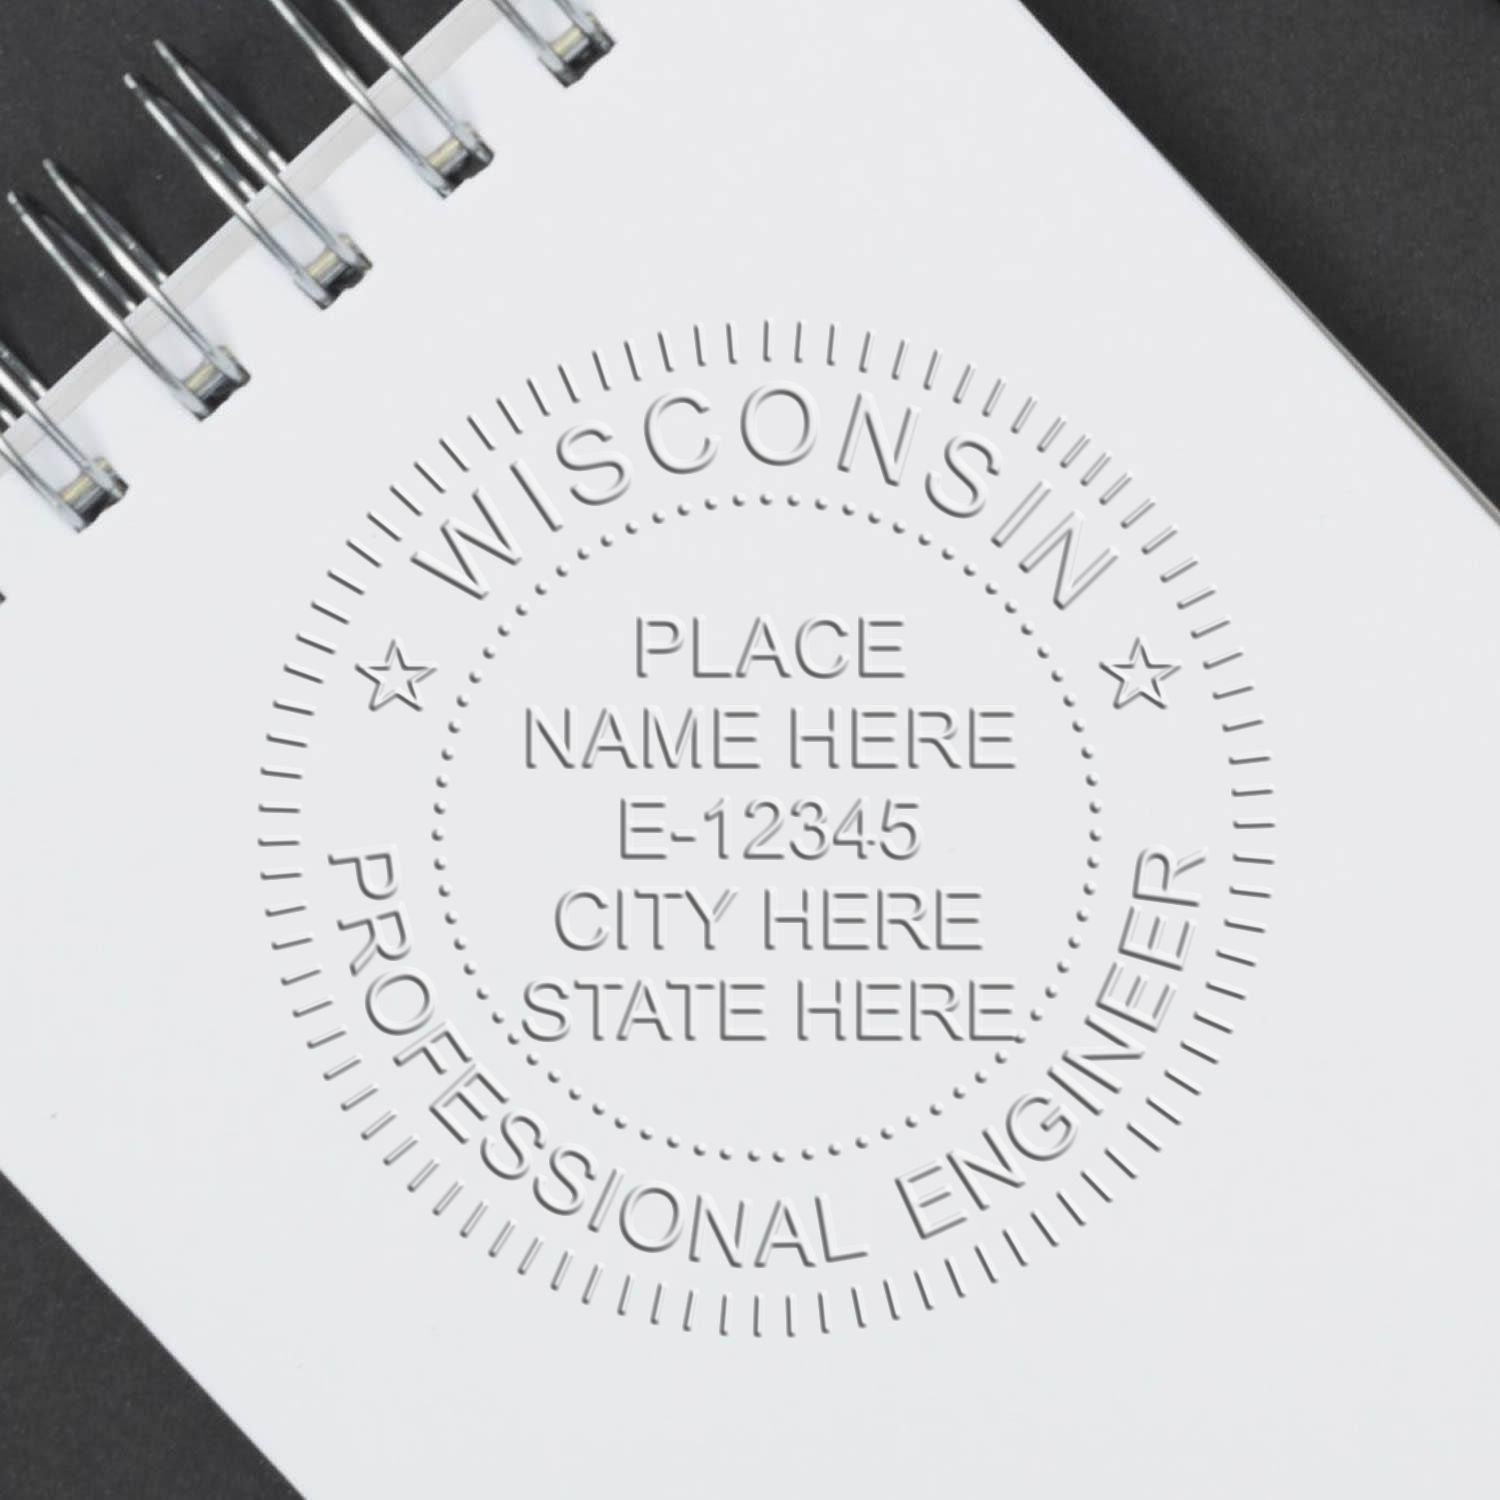 A photograph of the Wisconsin Engineer Desk Seal stamp impression reveals a vivid, professional image of the on paper.